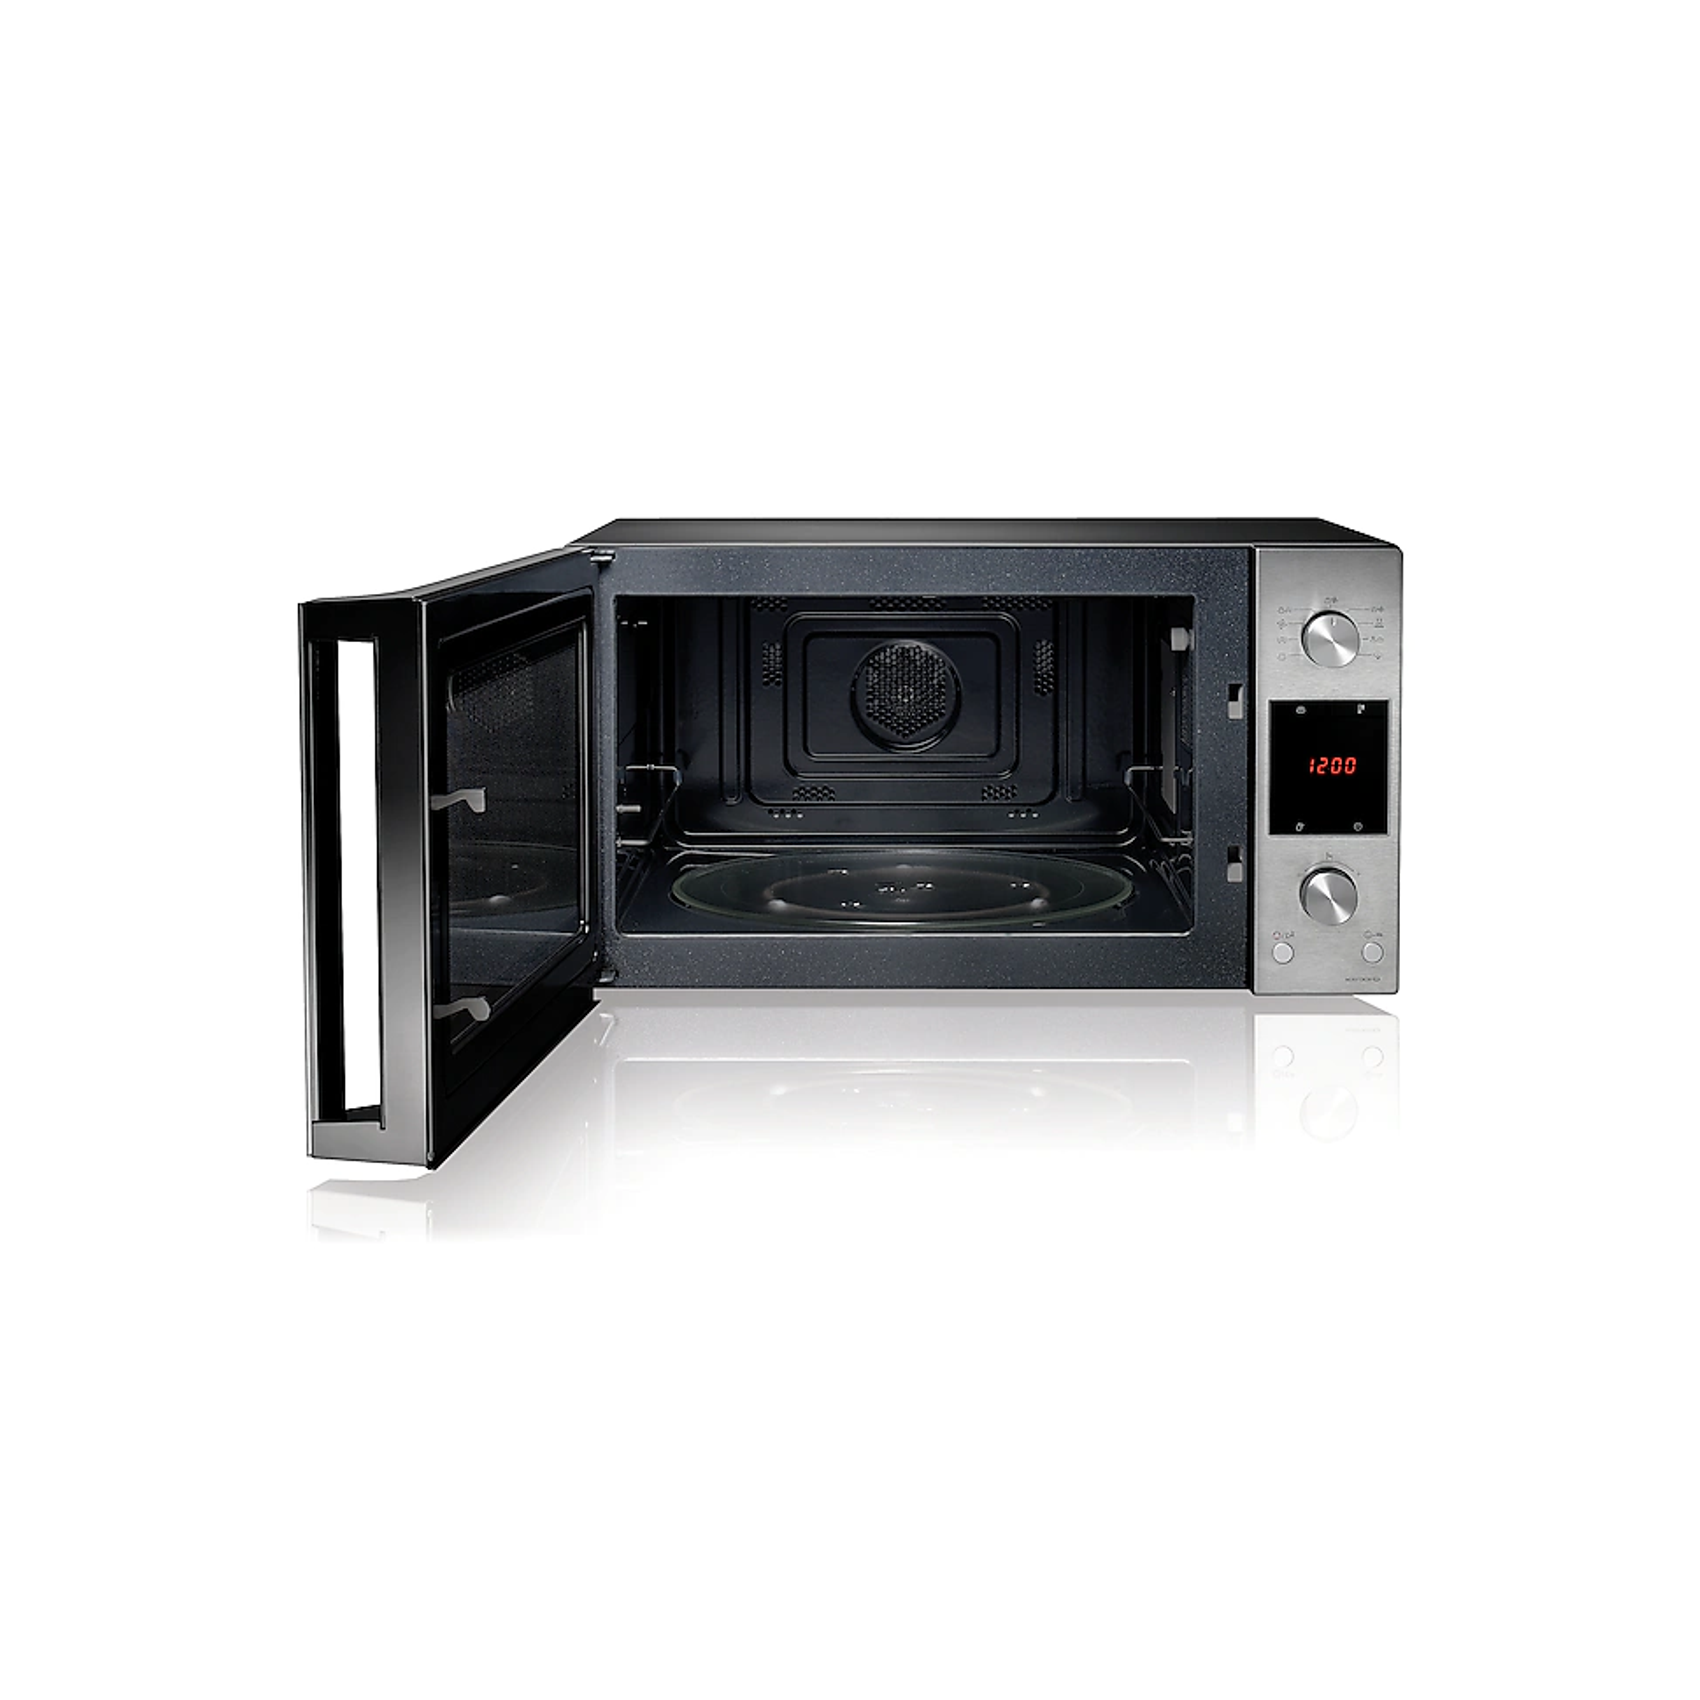 Samsung 45L Convection Microwave Oven with Smart Sensor (Photo: 3)